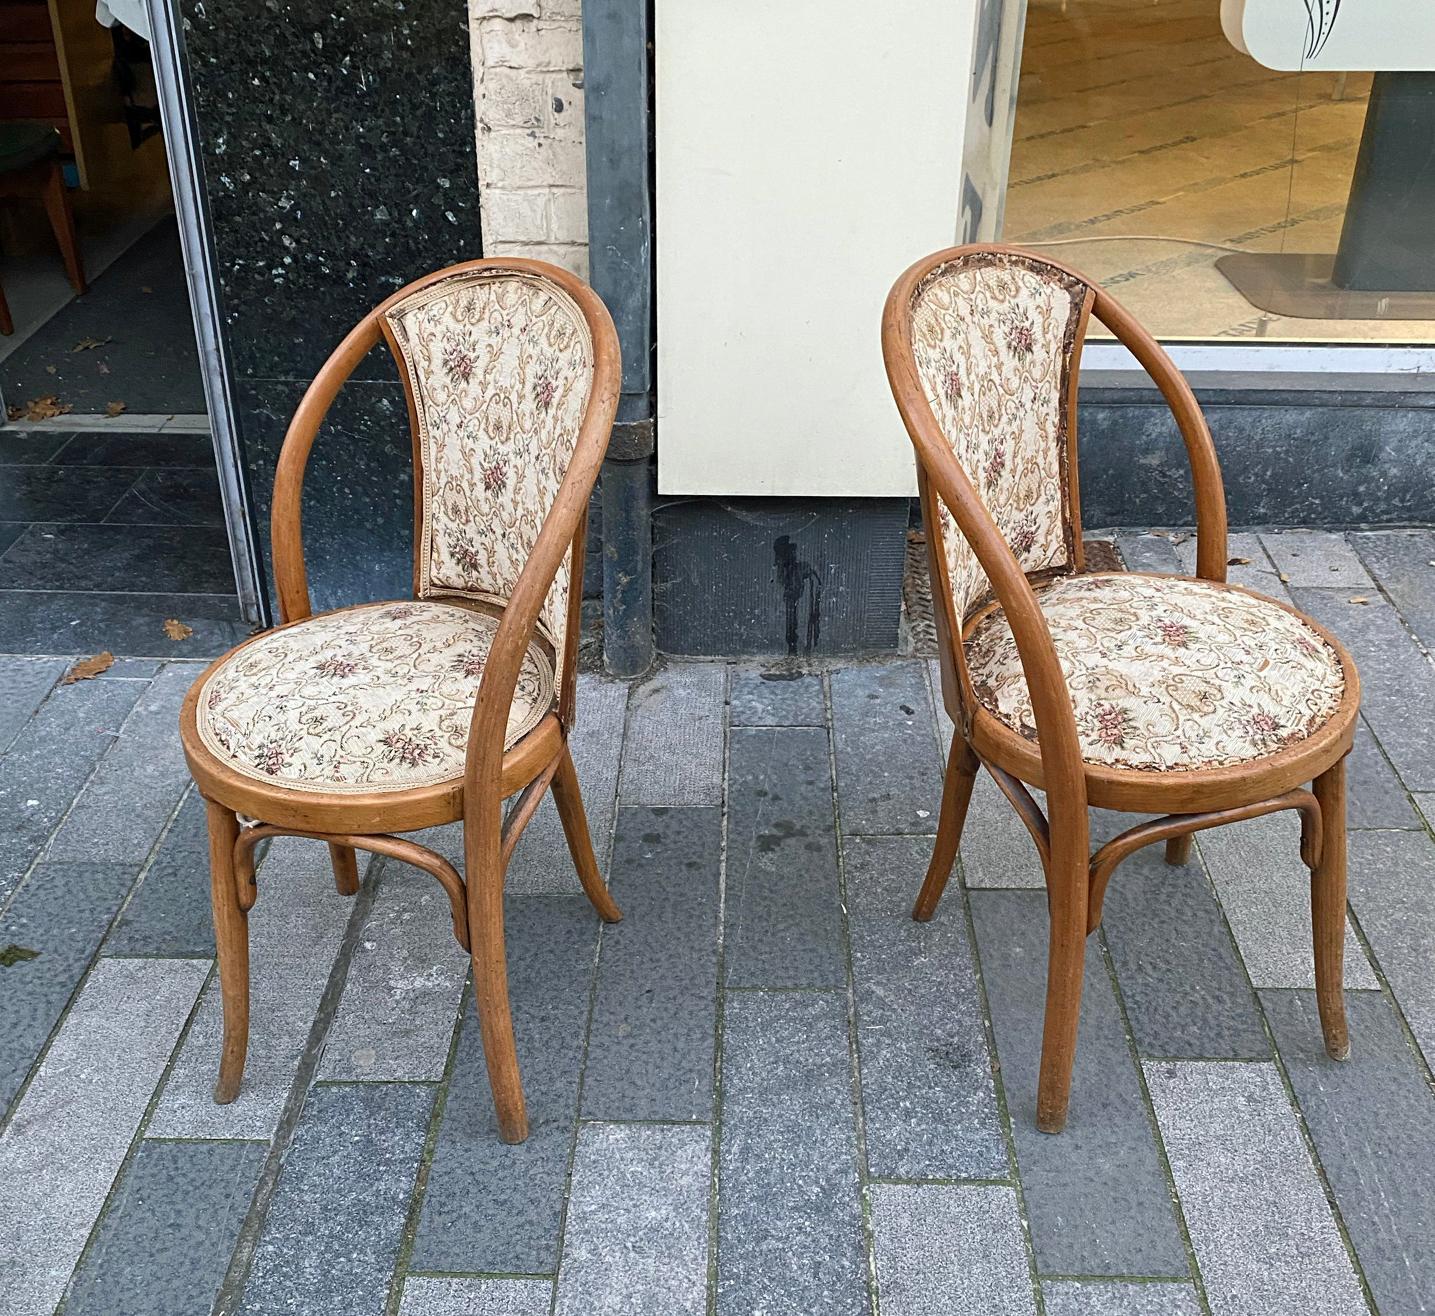 2 secession style chairs circa 1900 
several breaks and losses.